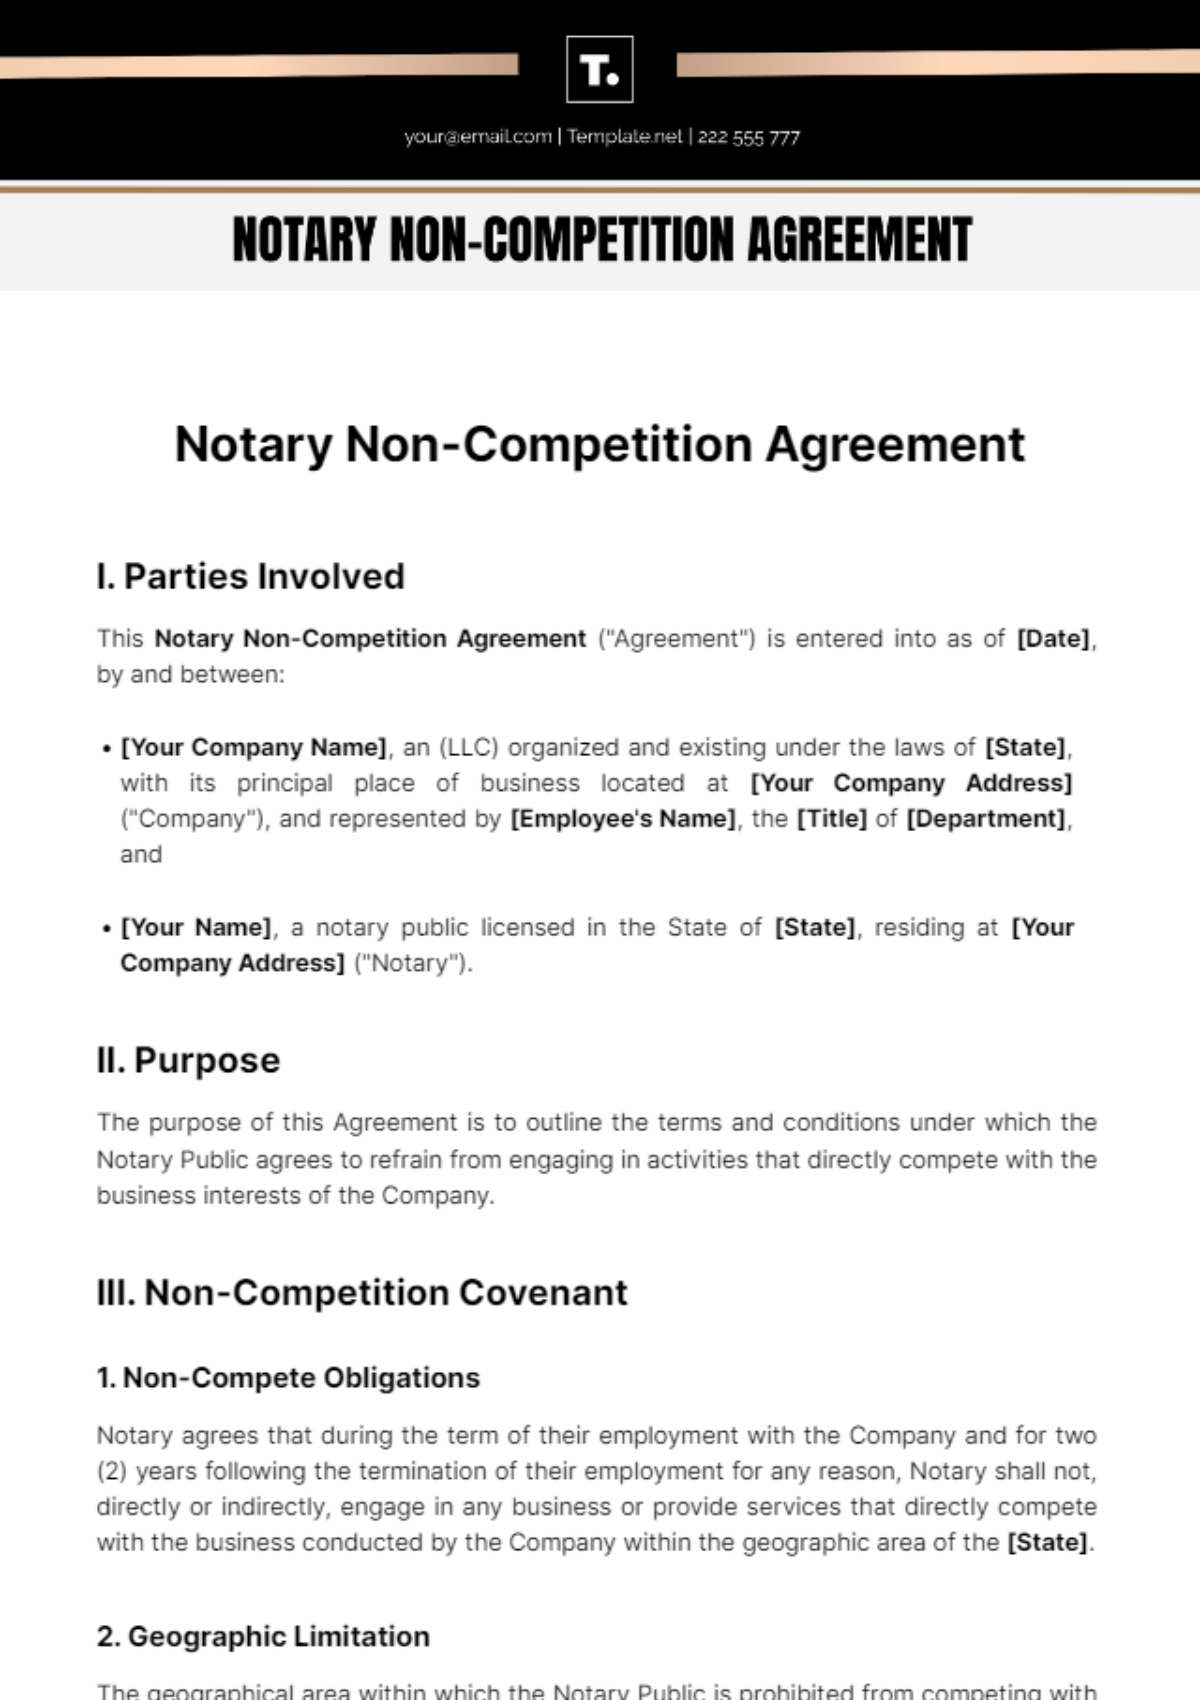 Notary Non-Competition Agreement Template